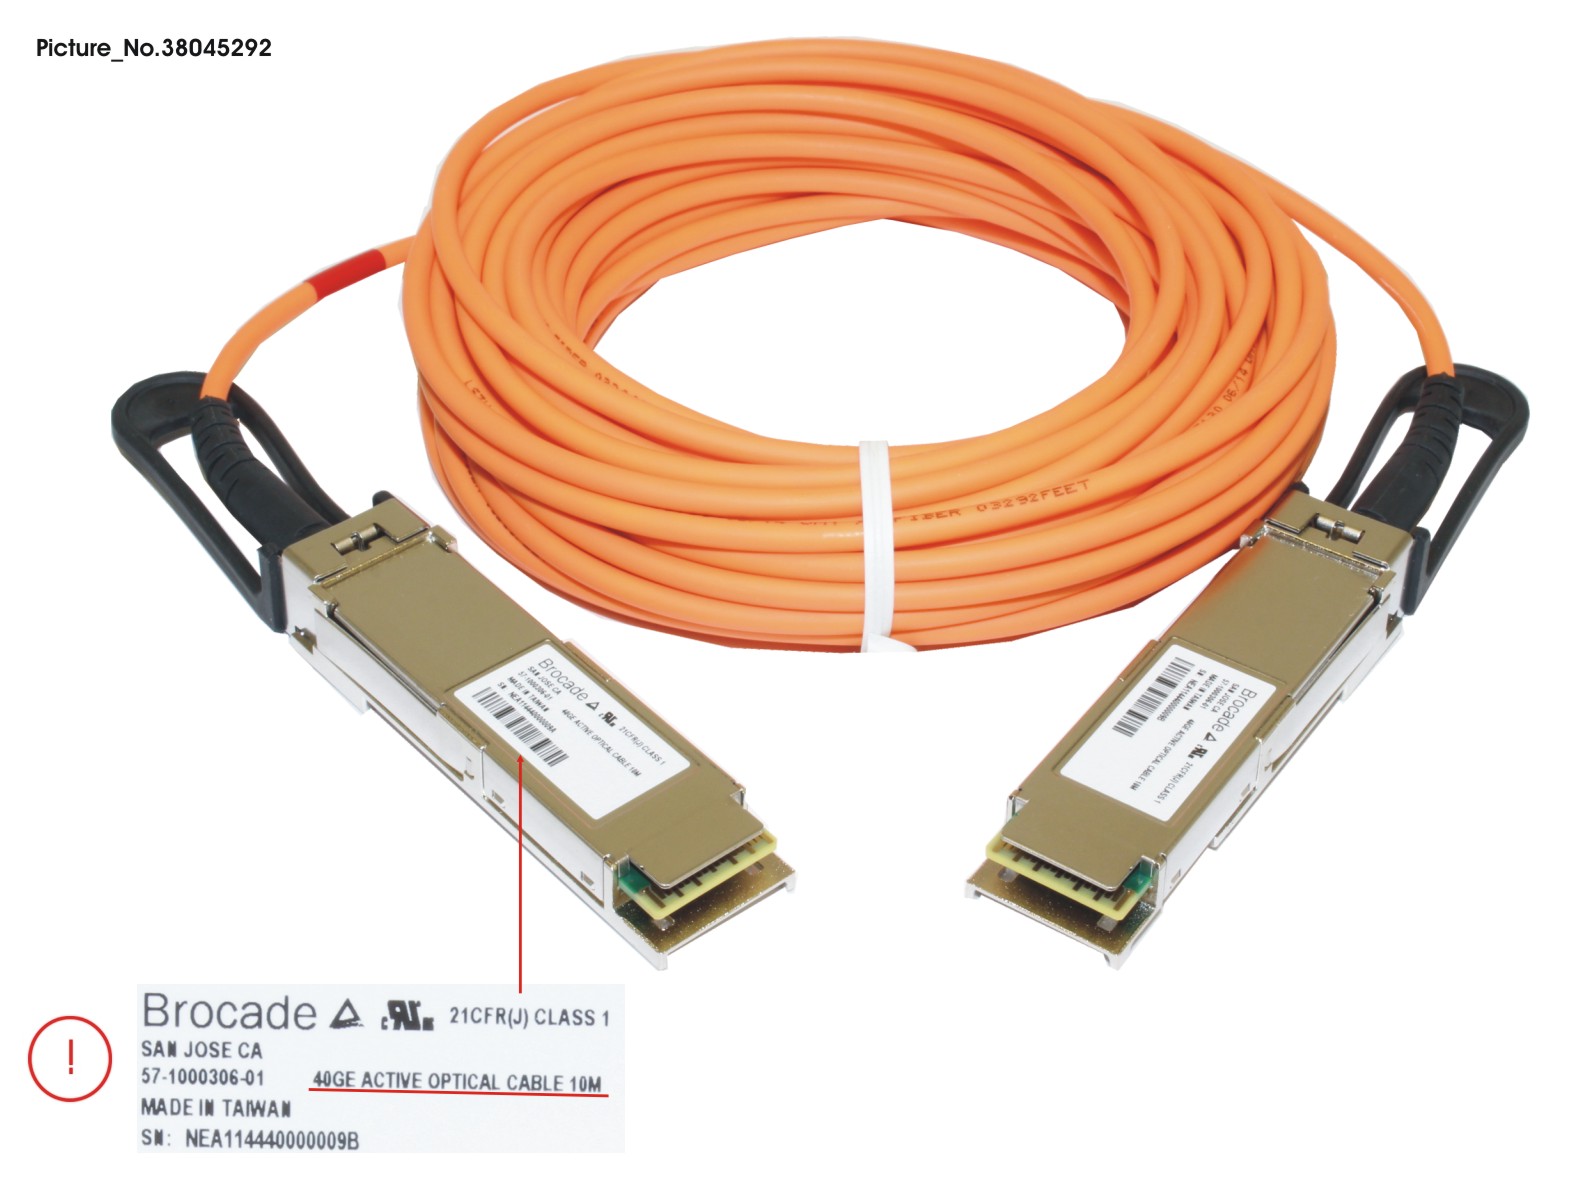 40GE DIRECT ATTACHED QSFP-QSFP,10M,1PACK